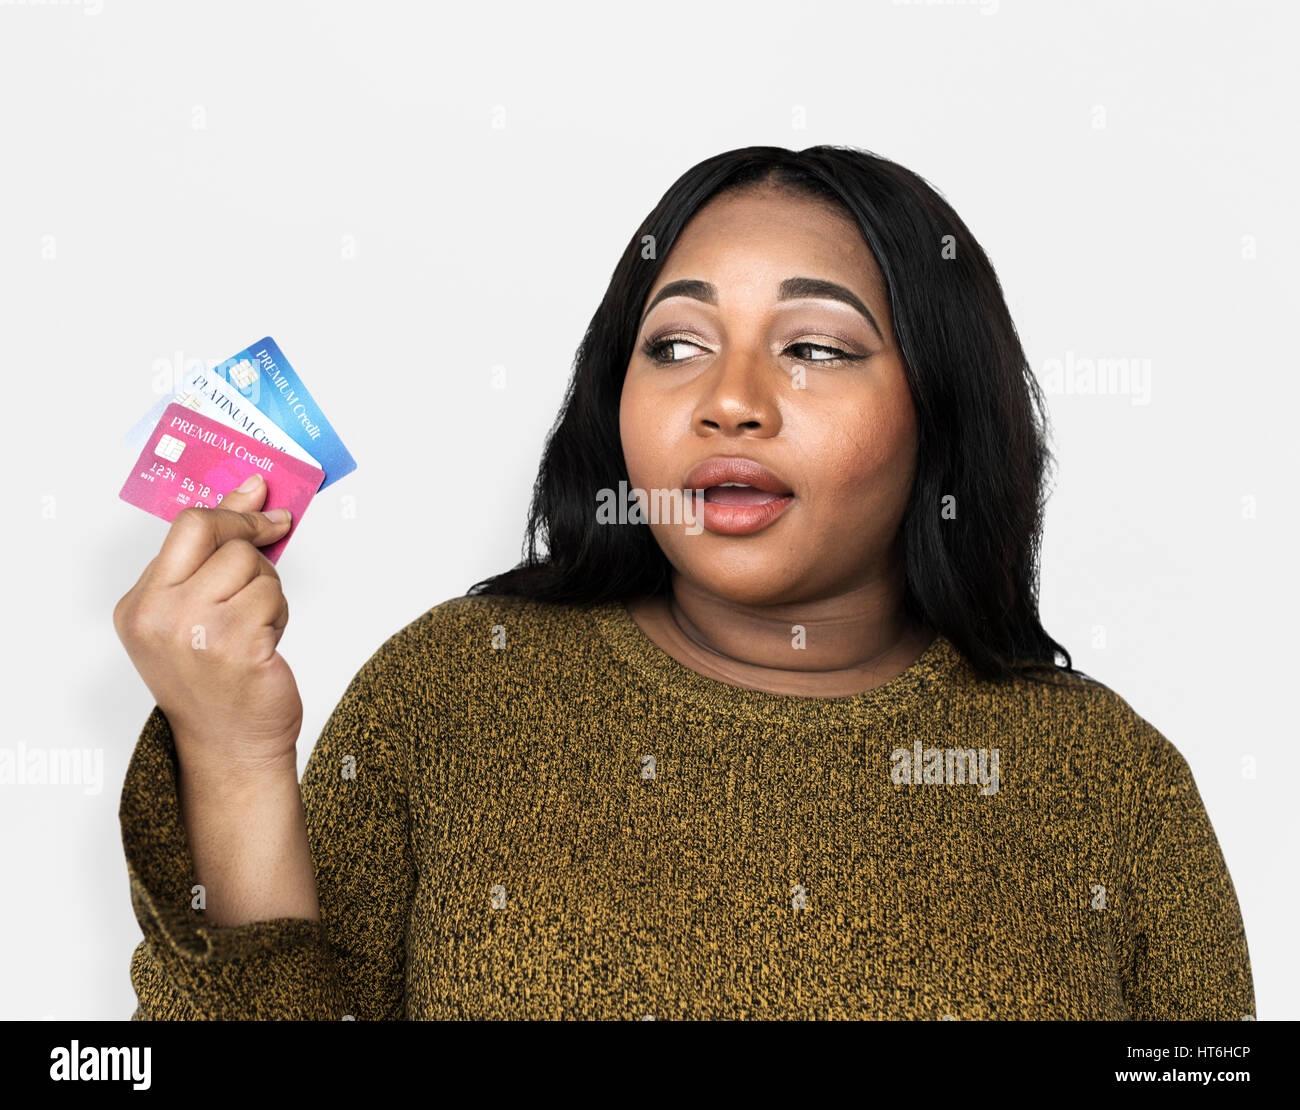 Woman Holdin Credit Cards Concept Stock Photo